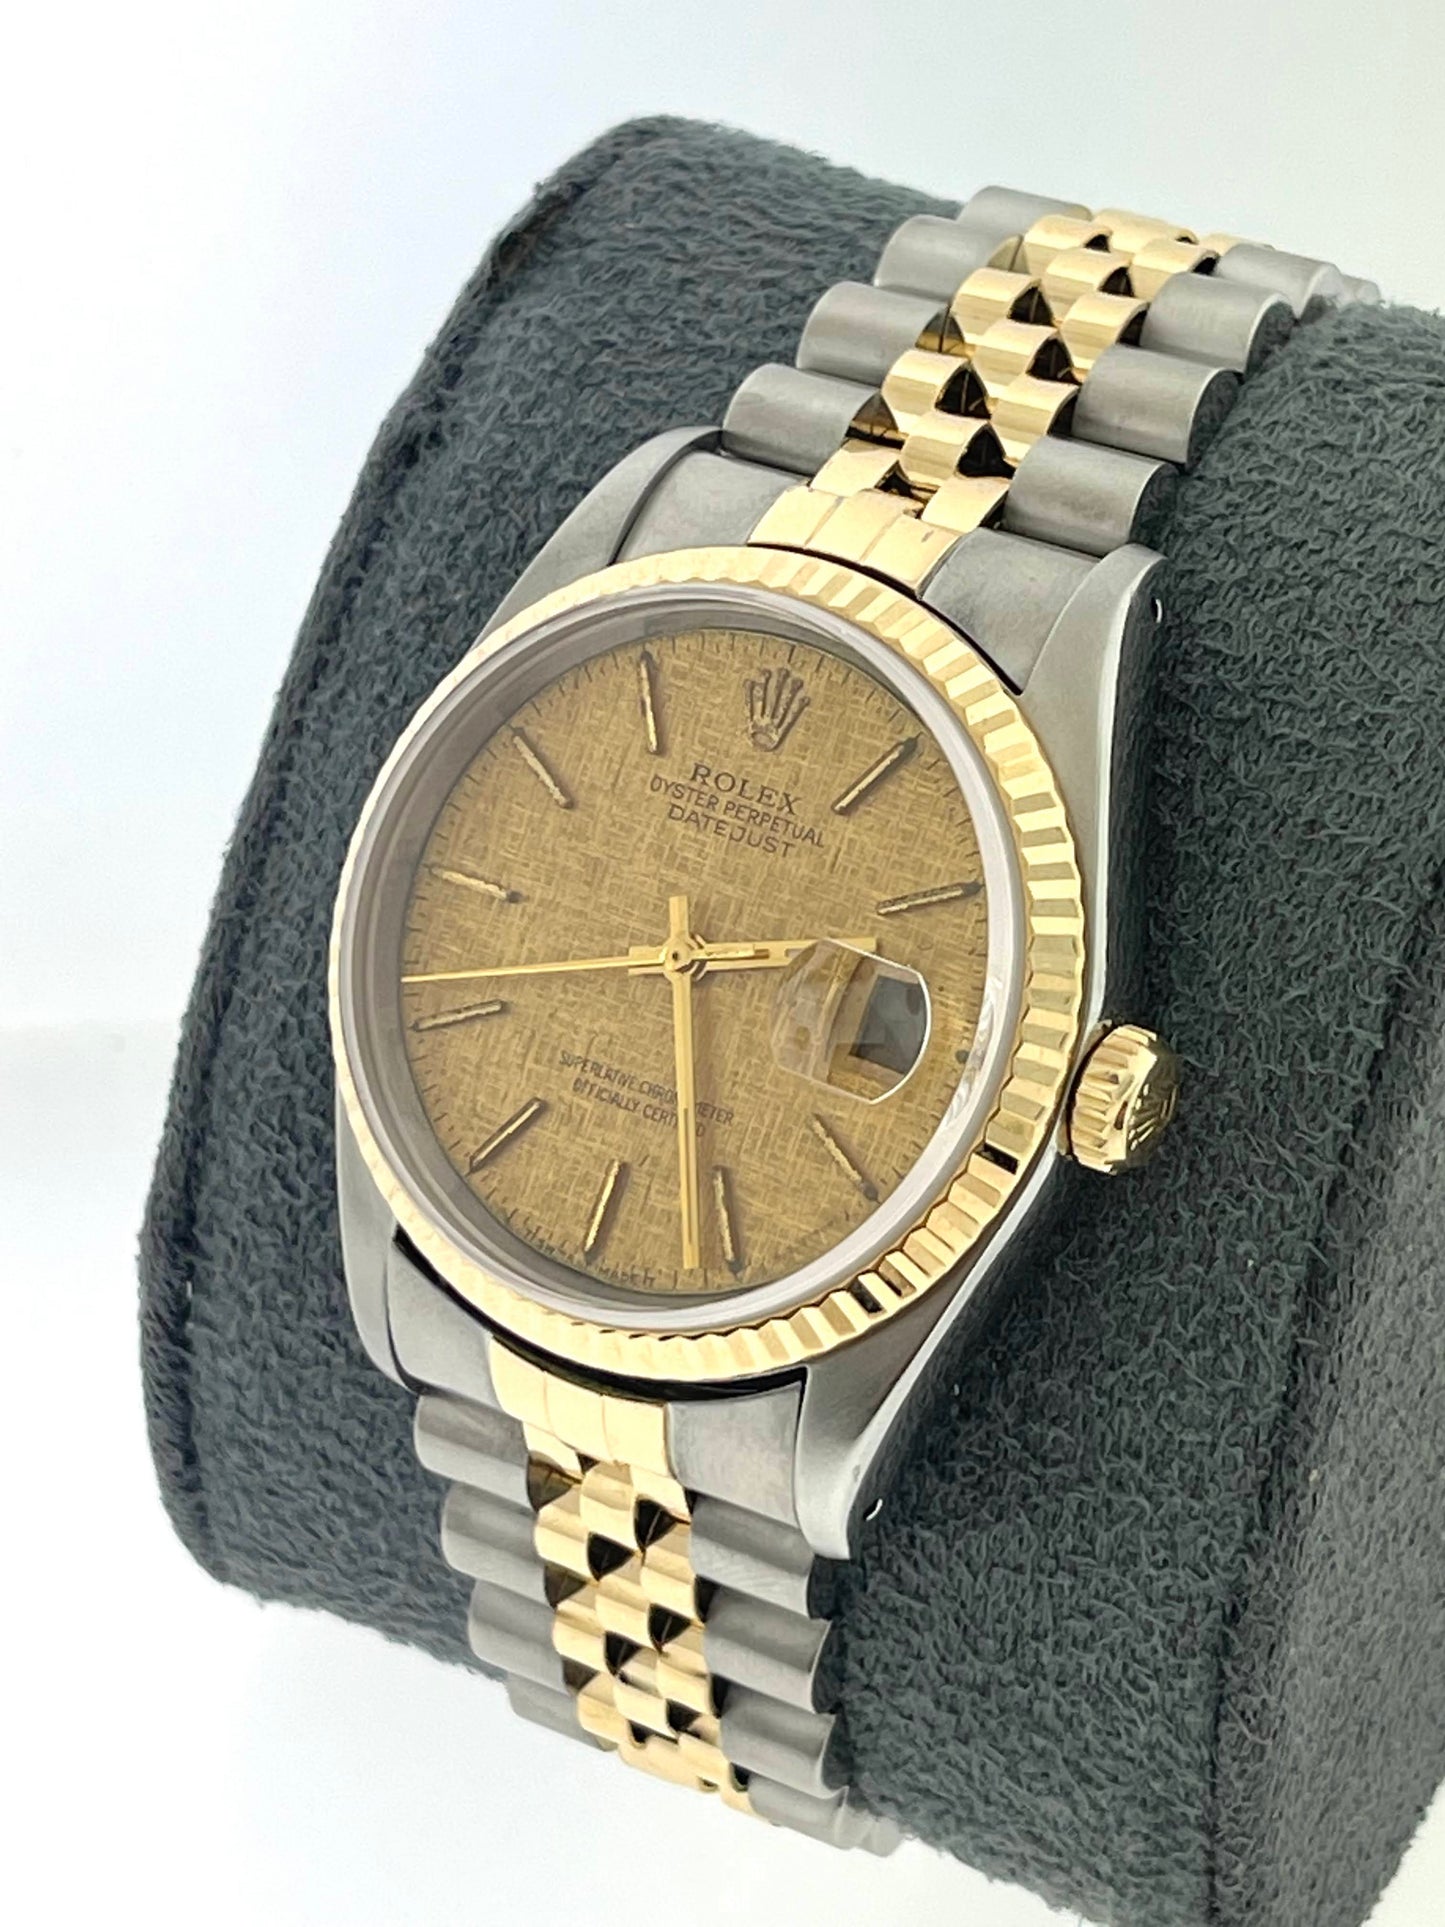 1991 Rolex Datejust 16233 Champagne Textured Dial No Papers 36mm